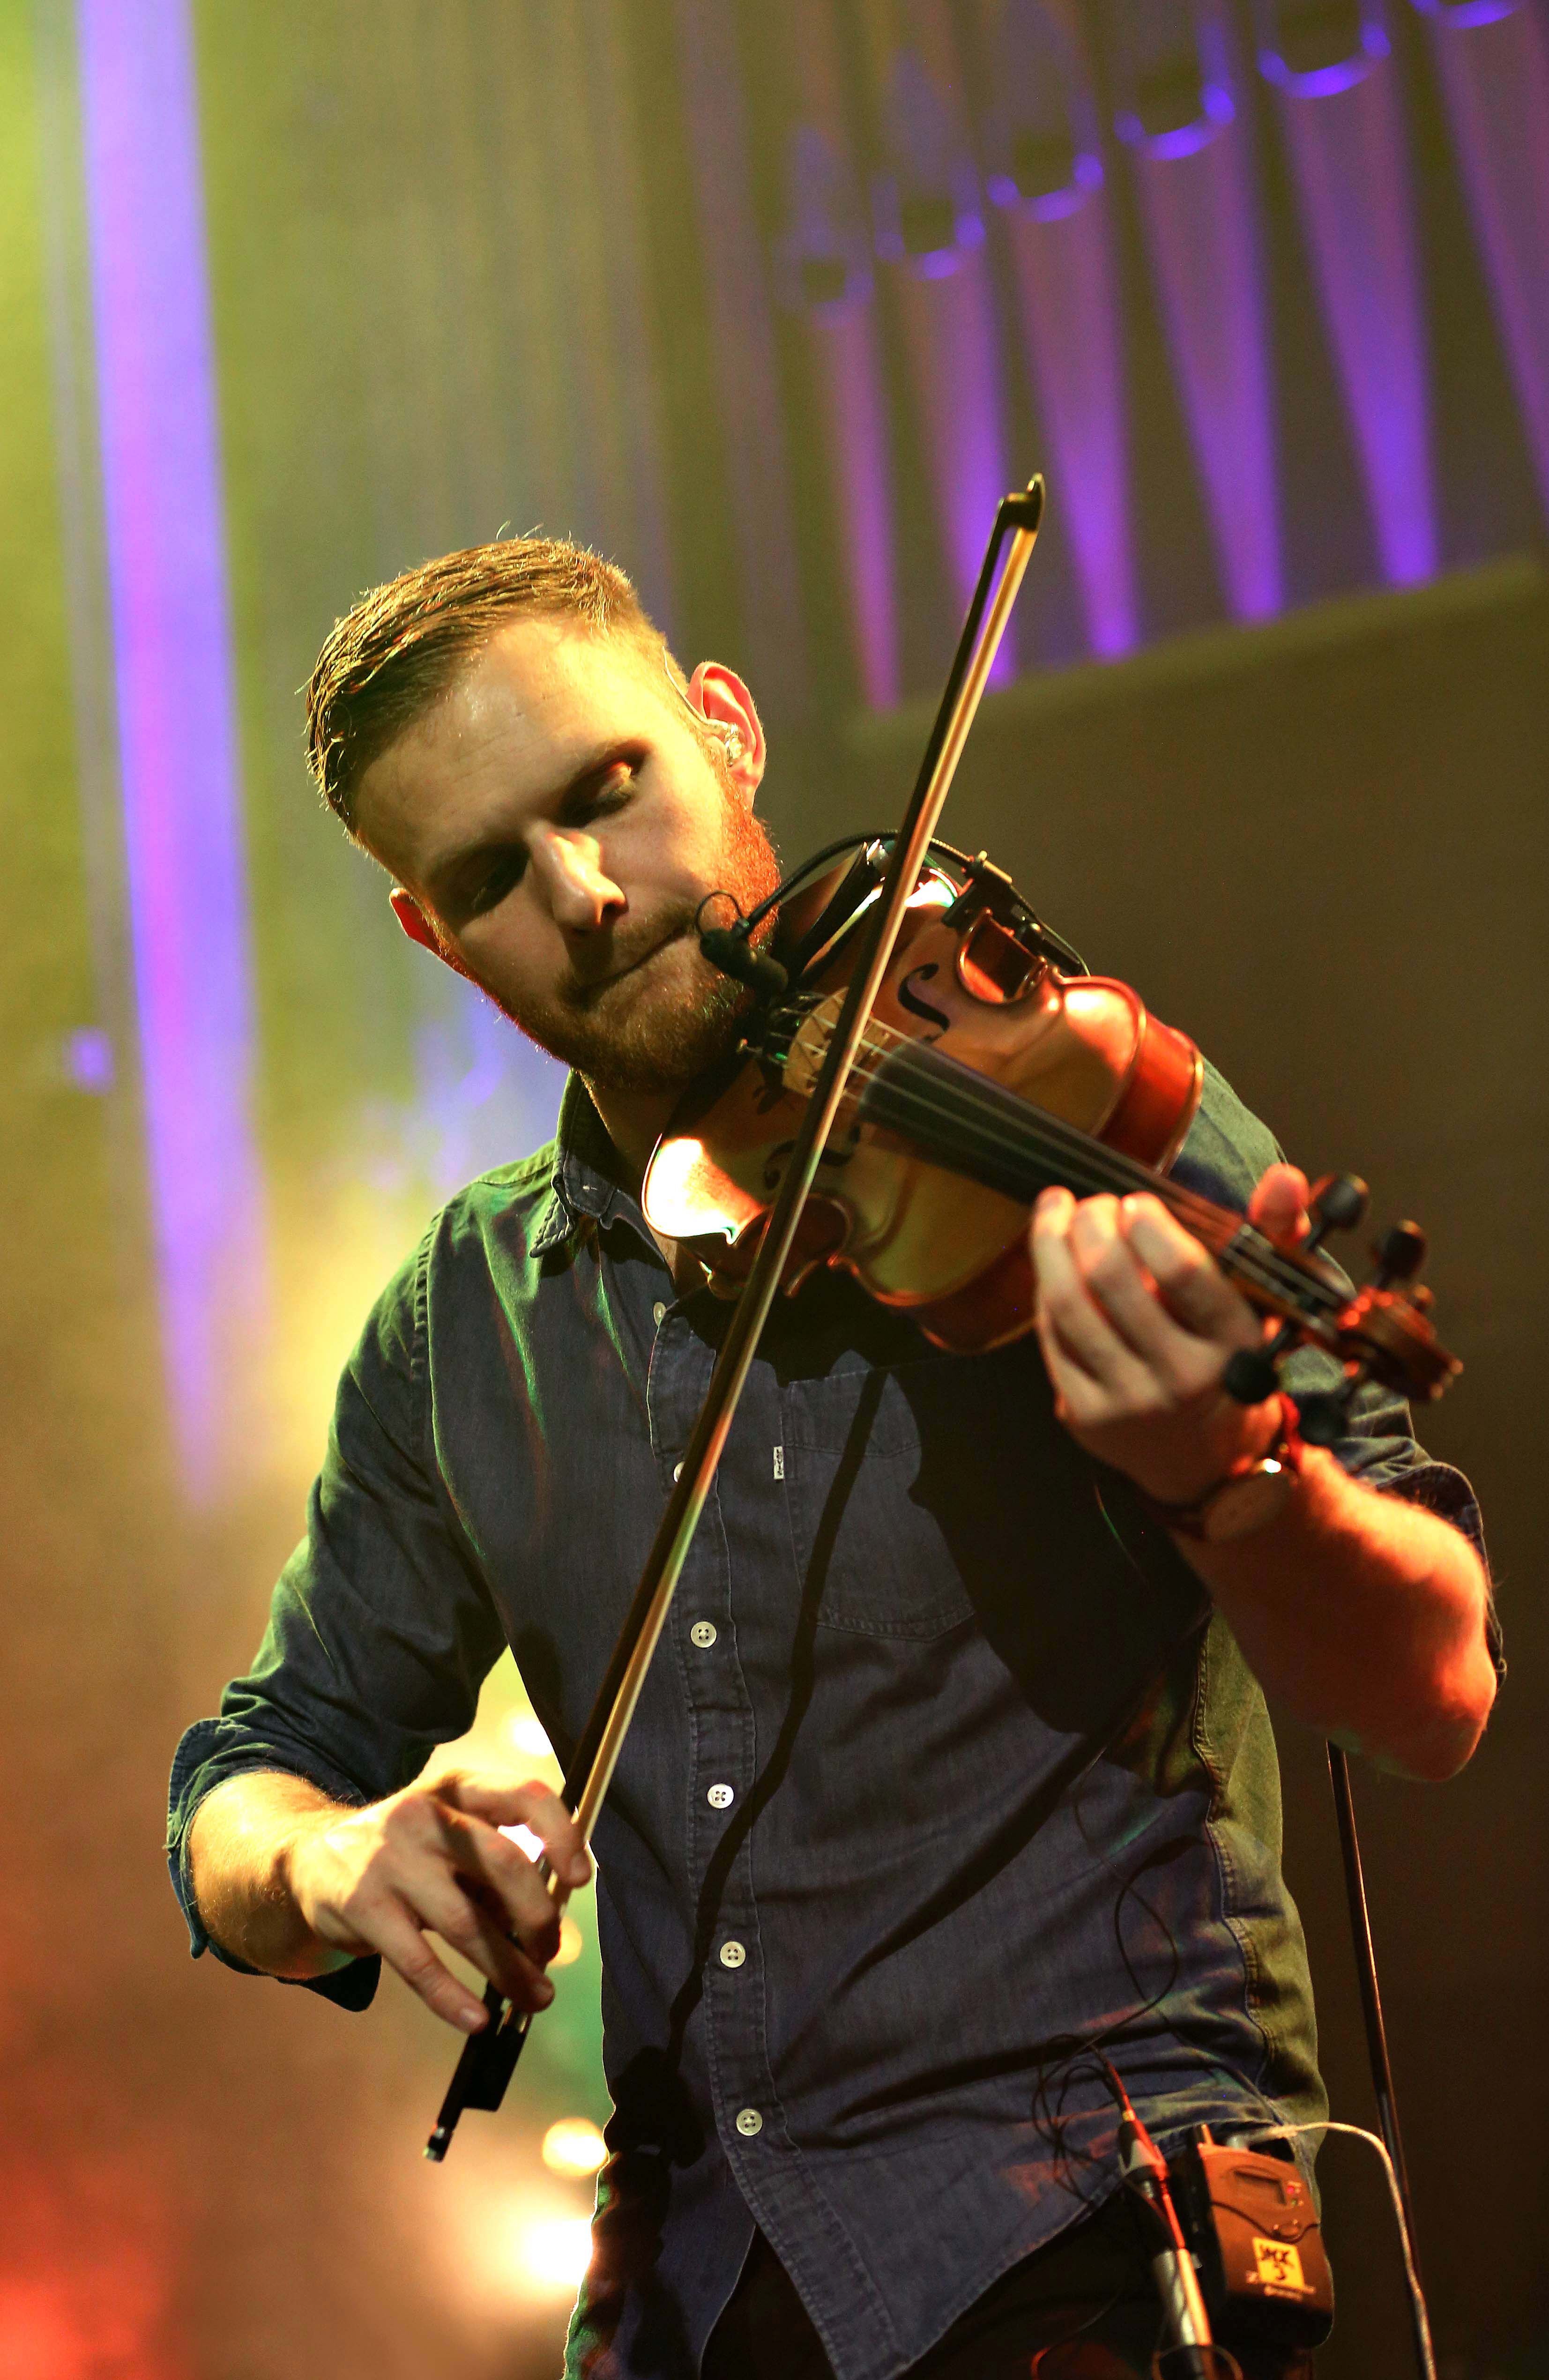 Jack Smedley from folk band Rura will be teaching a class